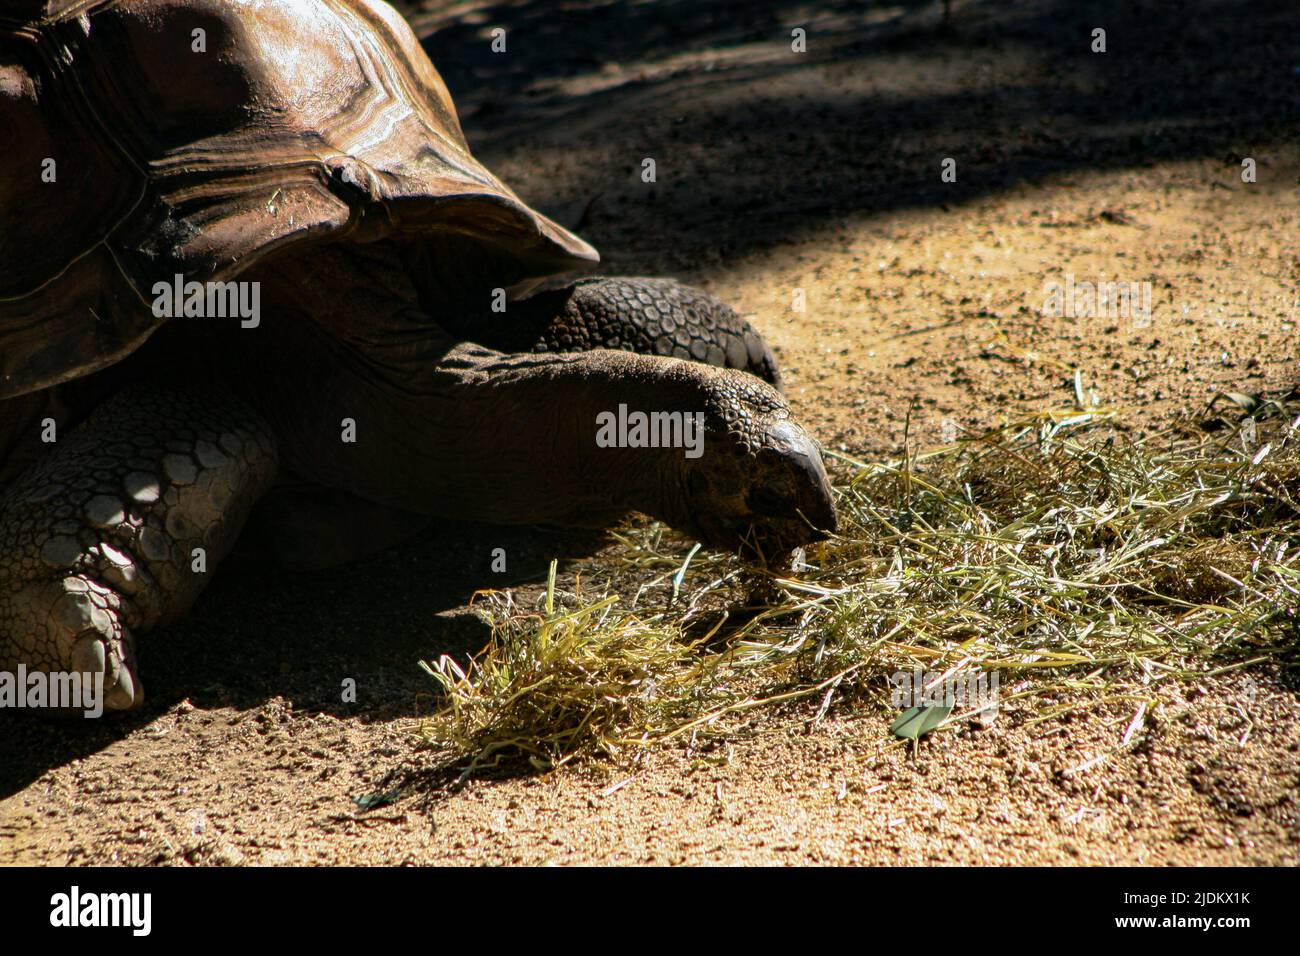 Galapagos tortoise eating lettuce in the shade Stock Photo